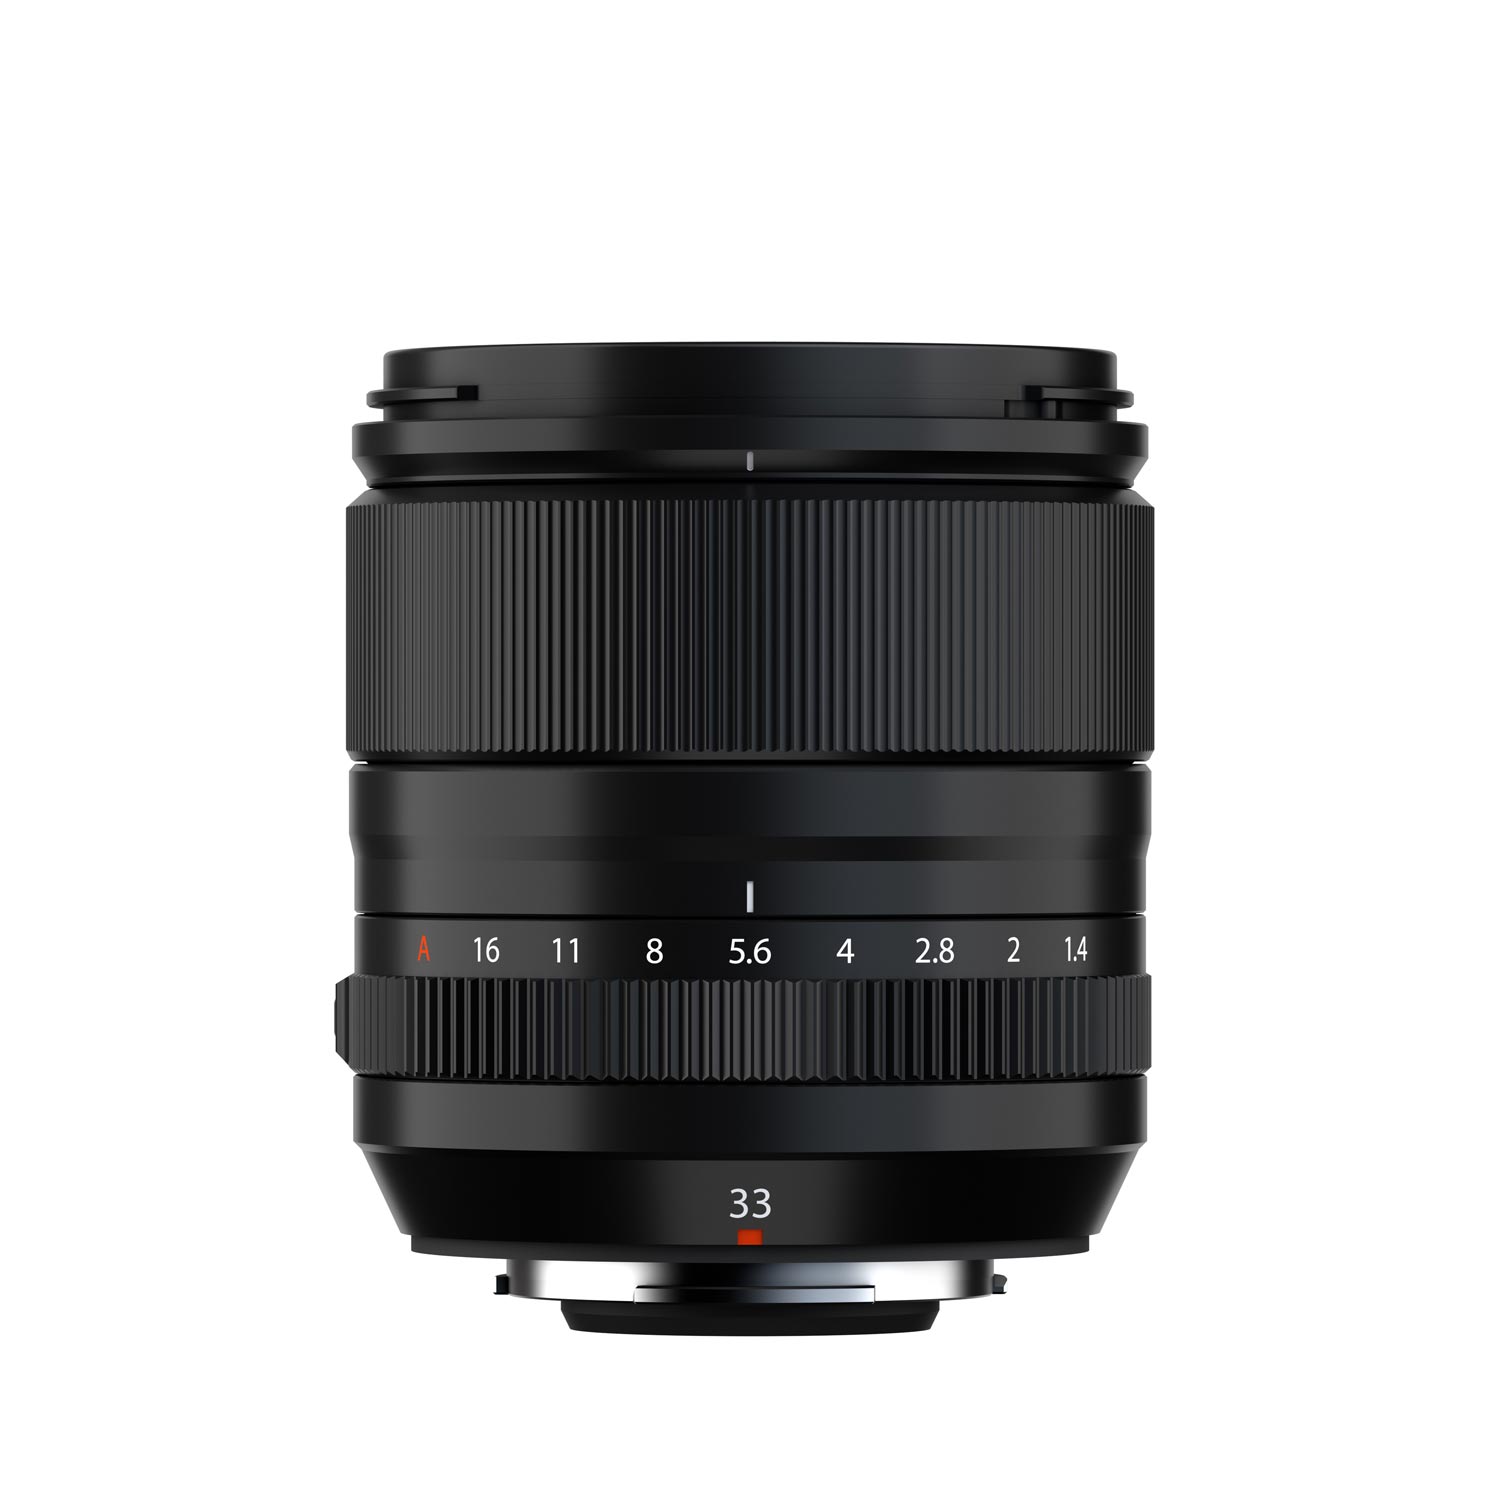 TThumbnail image for Fujinon XF 33mm F1.4 R LM WR